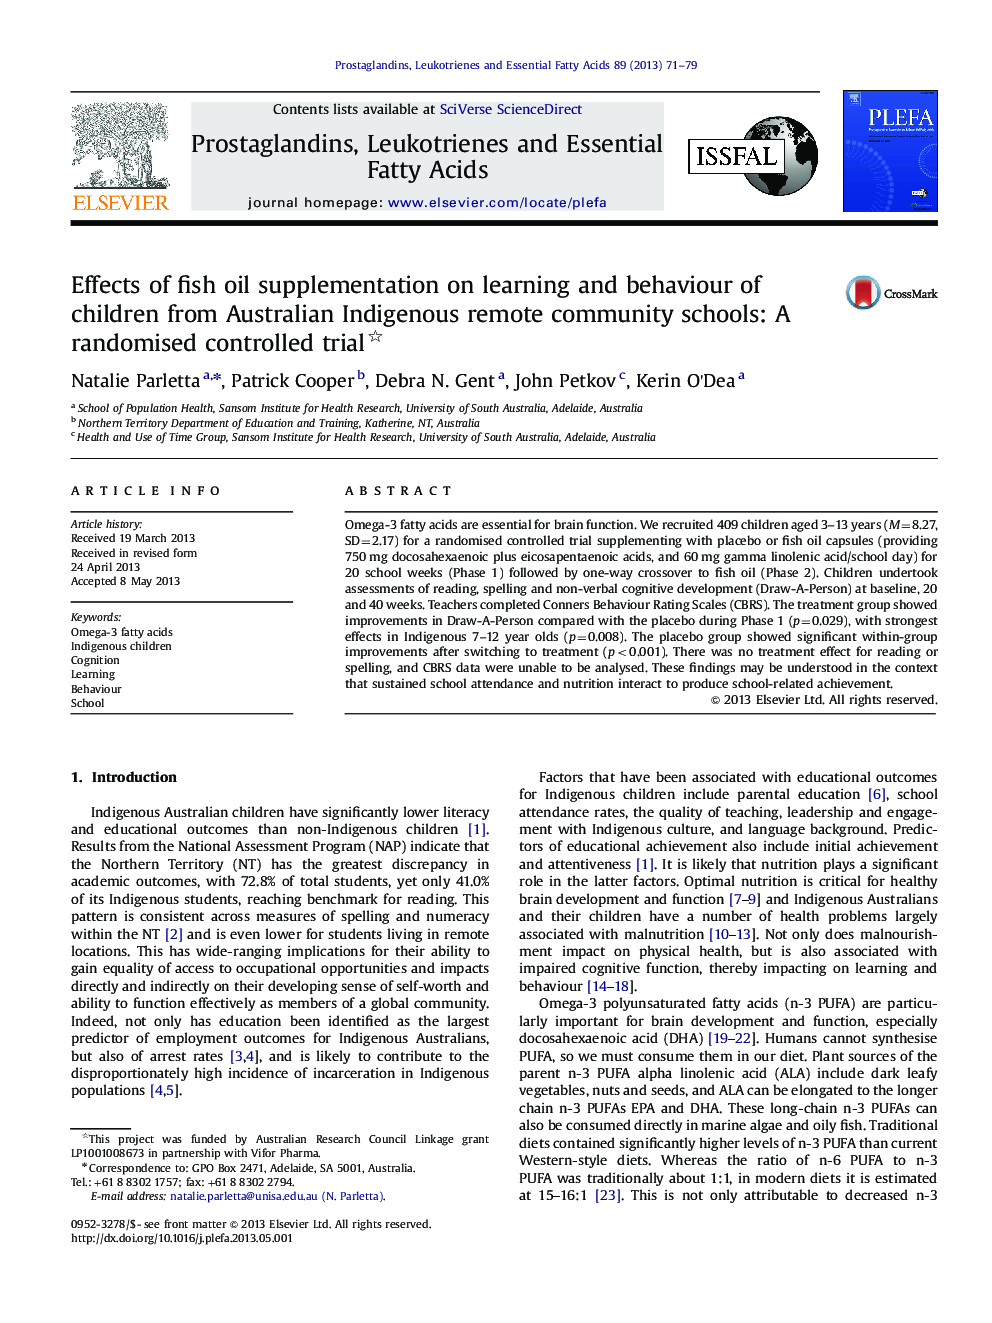 Effects of fish oil supplementation on learning and behaviour of children from Australian Indigenous remote community schools: A randomised controlled trial 